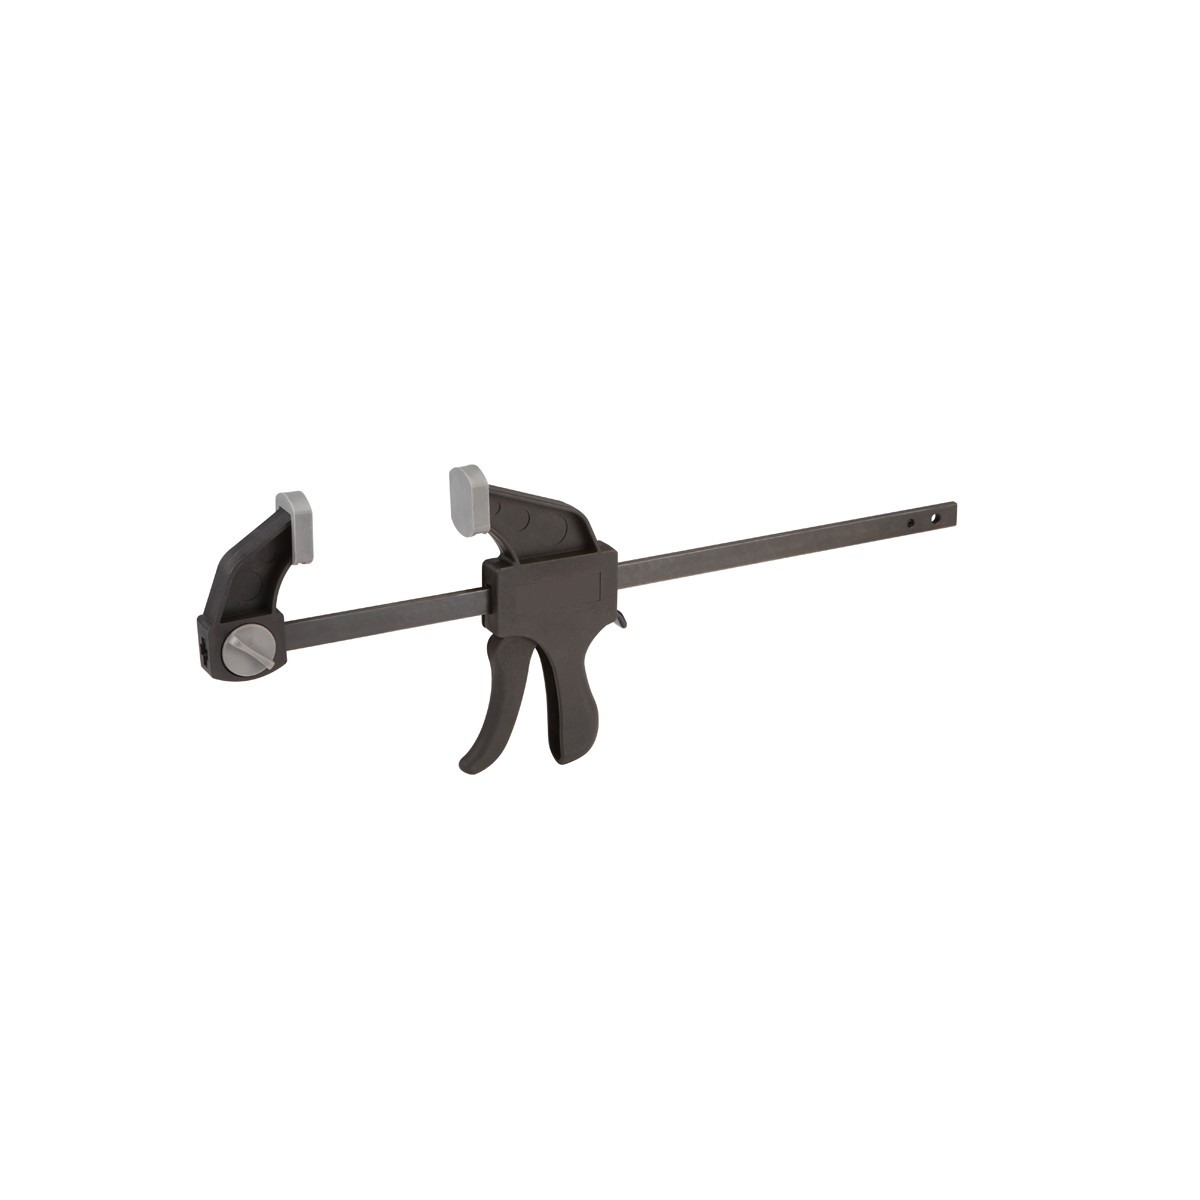 New   Pittsburgh  12 in. Ratcheting Bar Clamp / Spreader